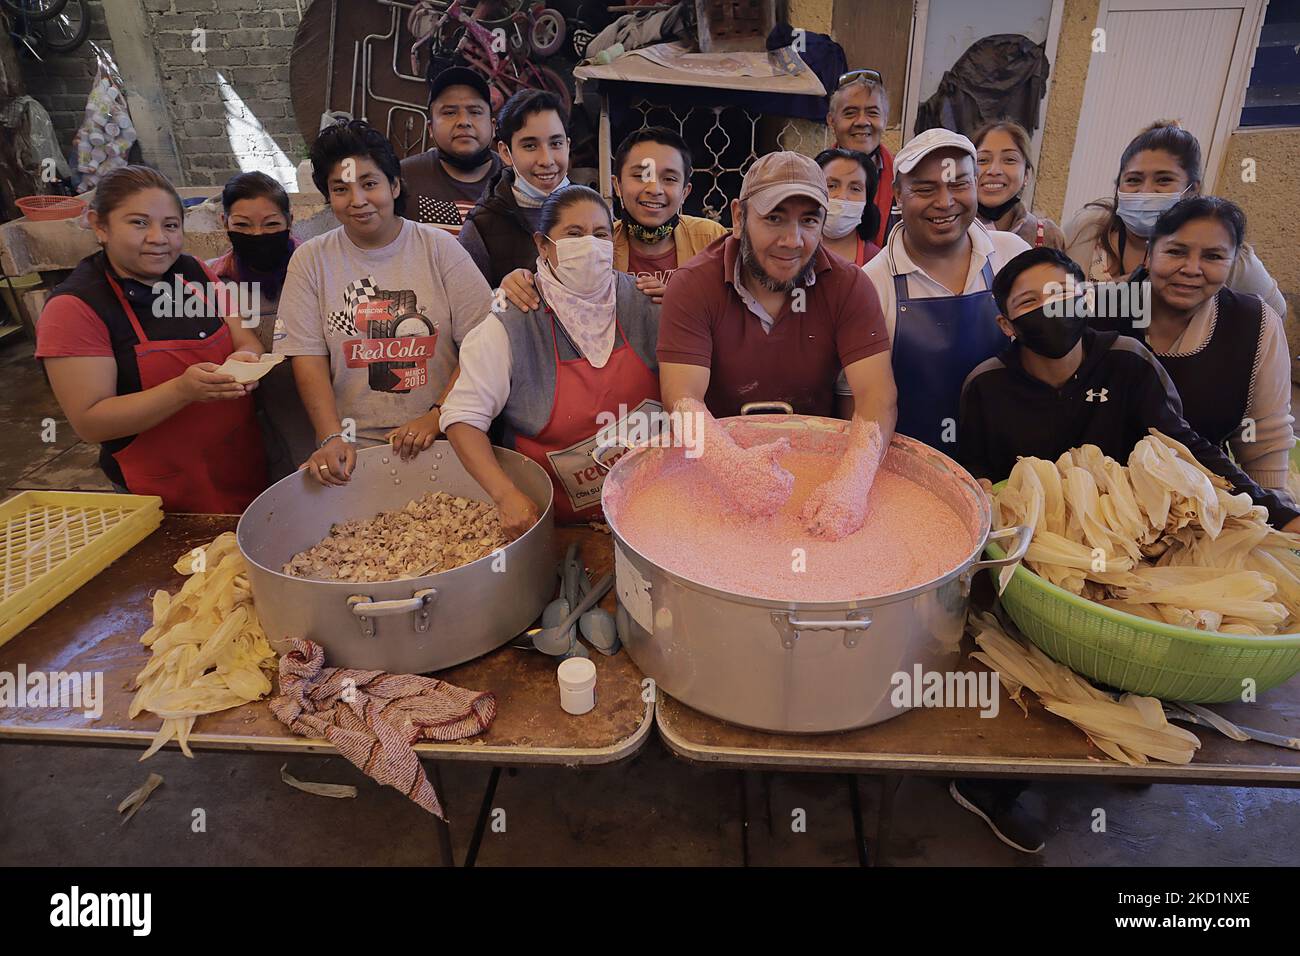 Inhabitants of San Francisco Culhuacán in Mexico City pose during the making of tamales on the occasion of Candlemas Day, which celebrates the period that closes the cycle of Christmas festivities within the Catholic Church. The tamale (from the Nahuatl tamalli, which means wrapped) is a Mexican food made from corn, filled with various ingredients, cooked in a bundle of vegetable leaves that can be made of corn, plantain, reed, chilaca or papatla. (Photo by Gerardo Vieyra/NurPhoto) Stock Photo